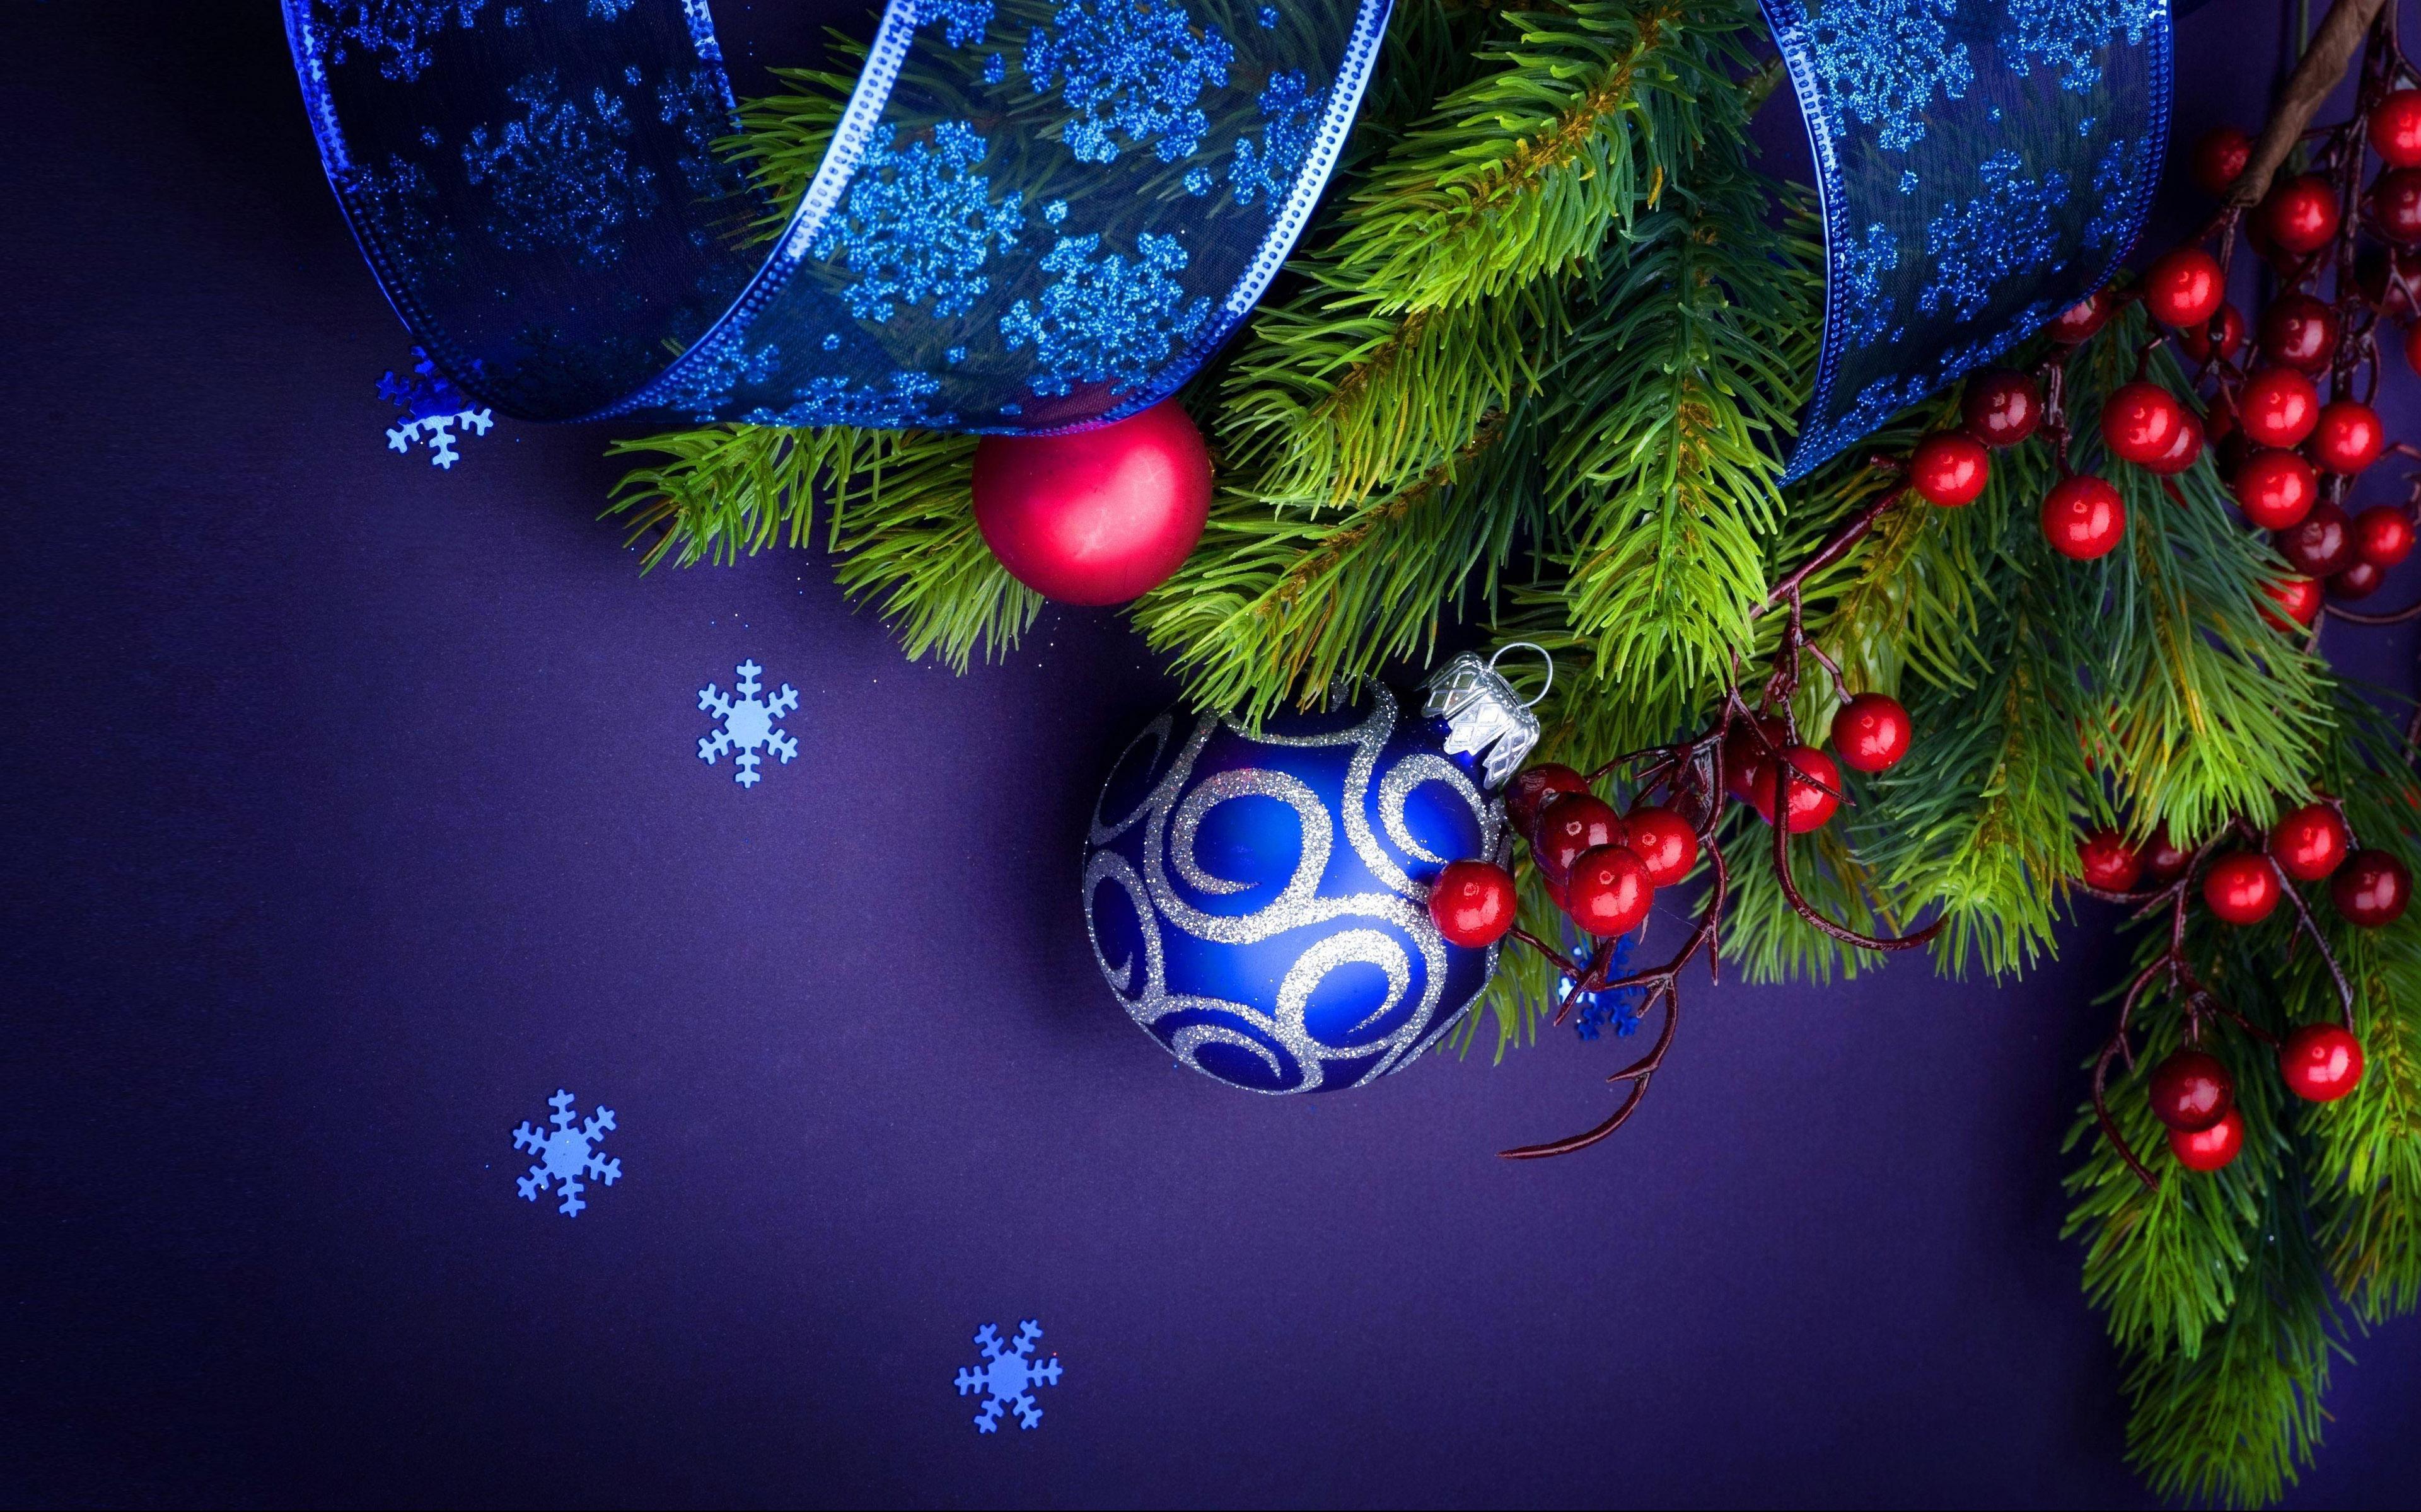  4K Christmas Ornaments Wallpapers Background Images